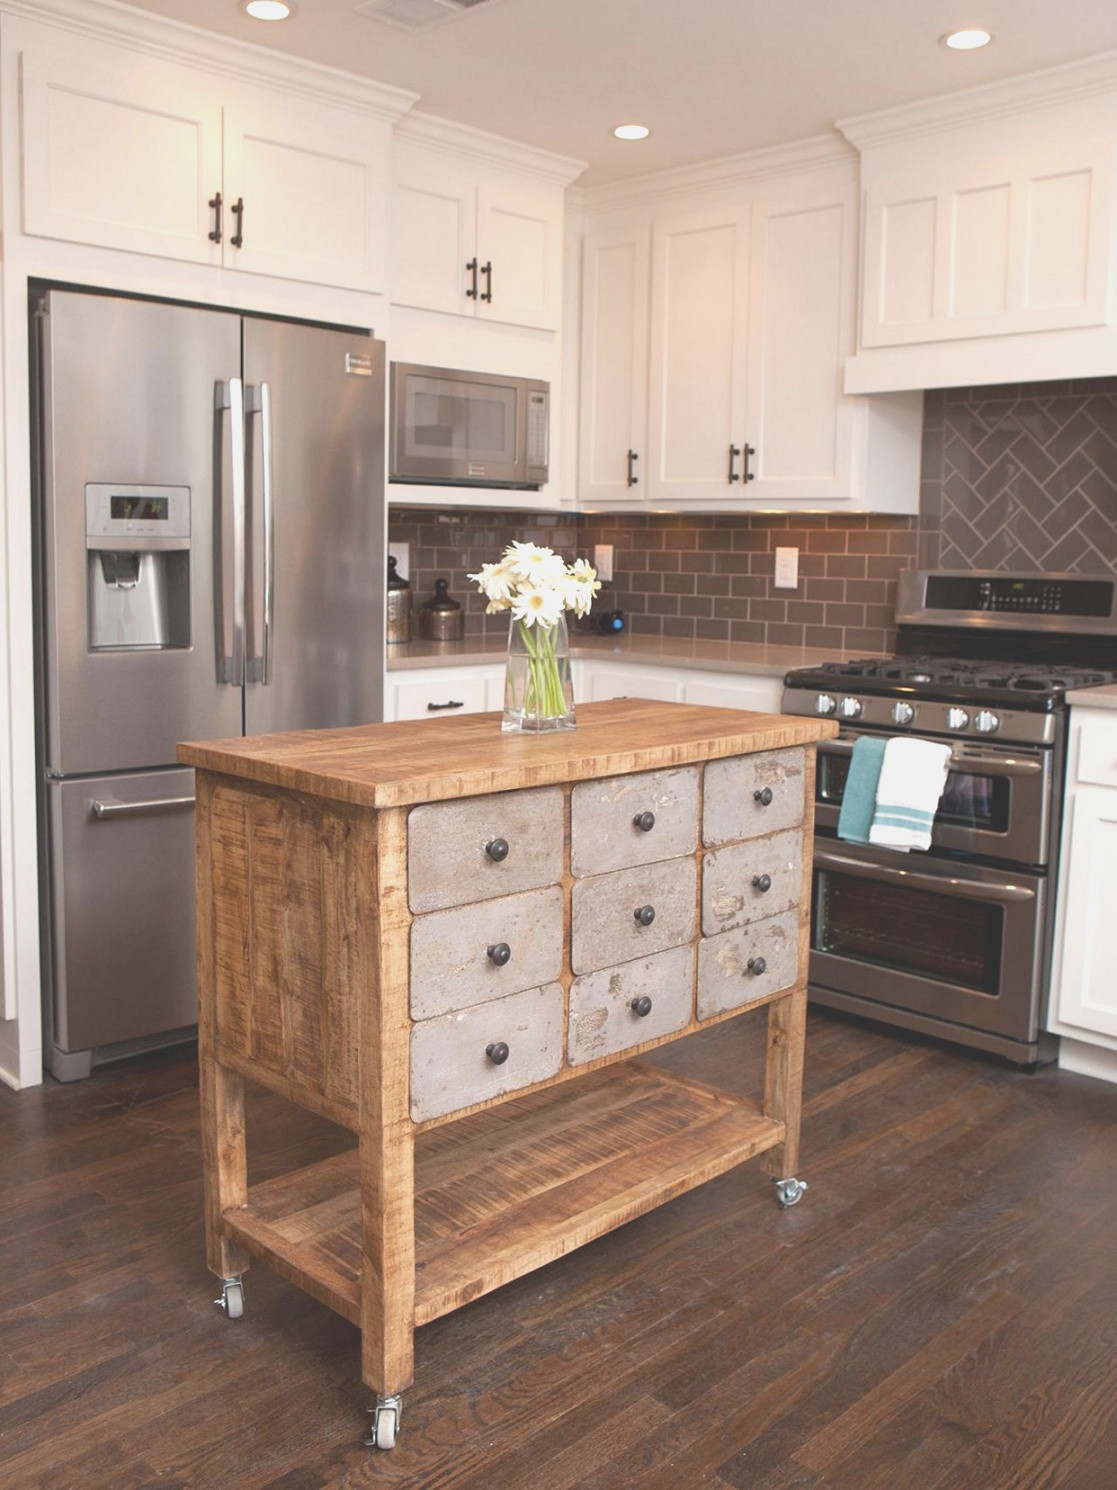 Small Kitchen Island On Wheels
 Things That Make You Love And Hate Kitchen